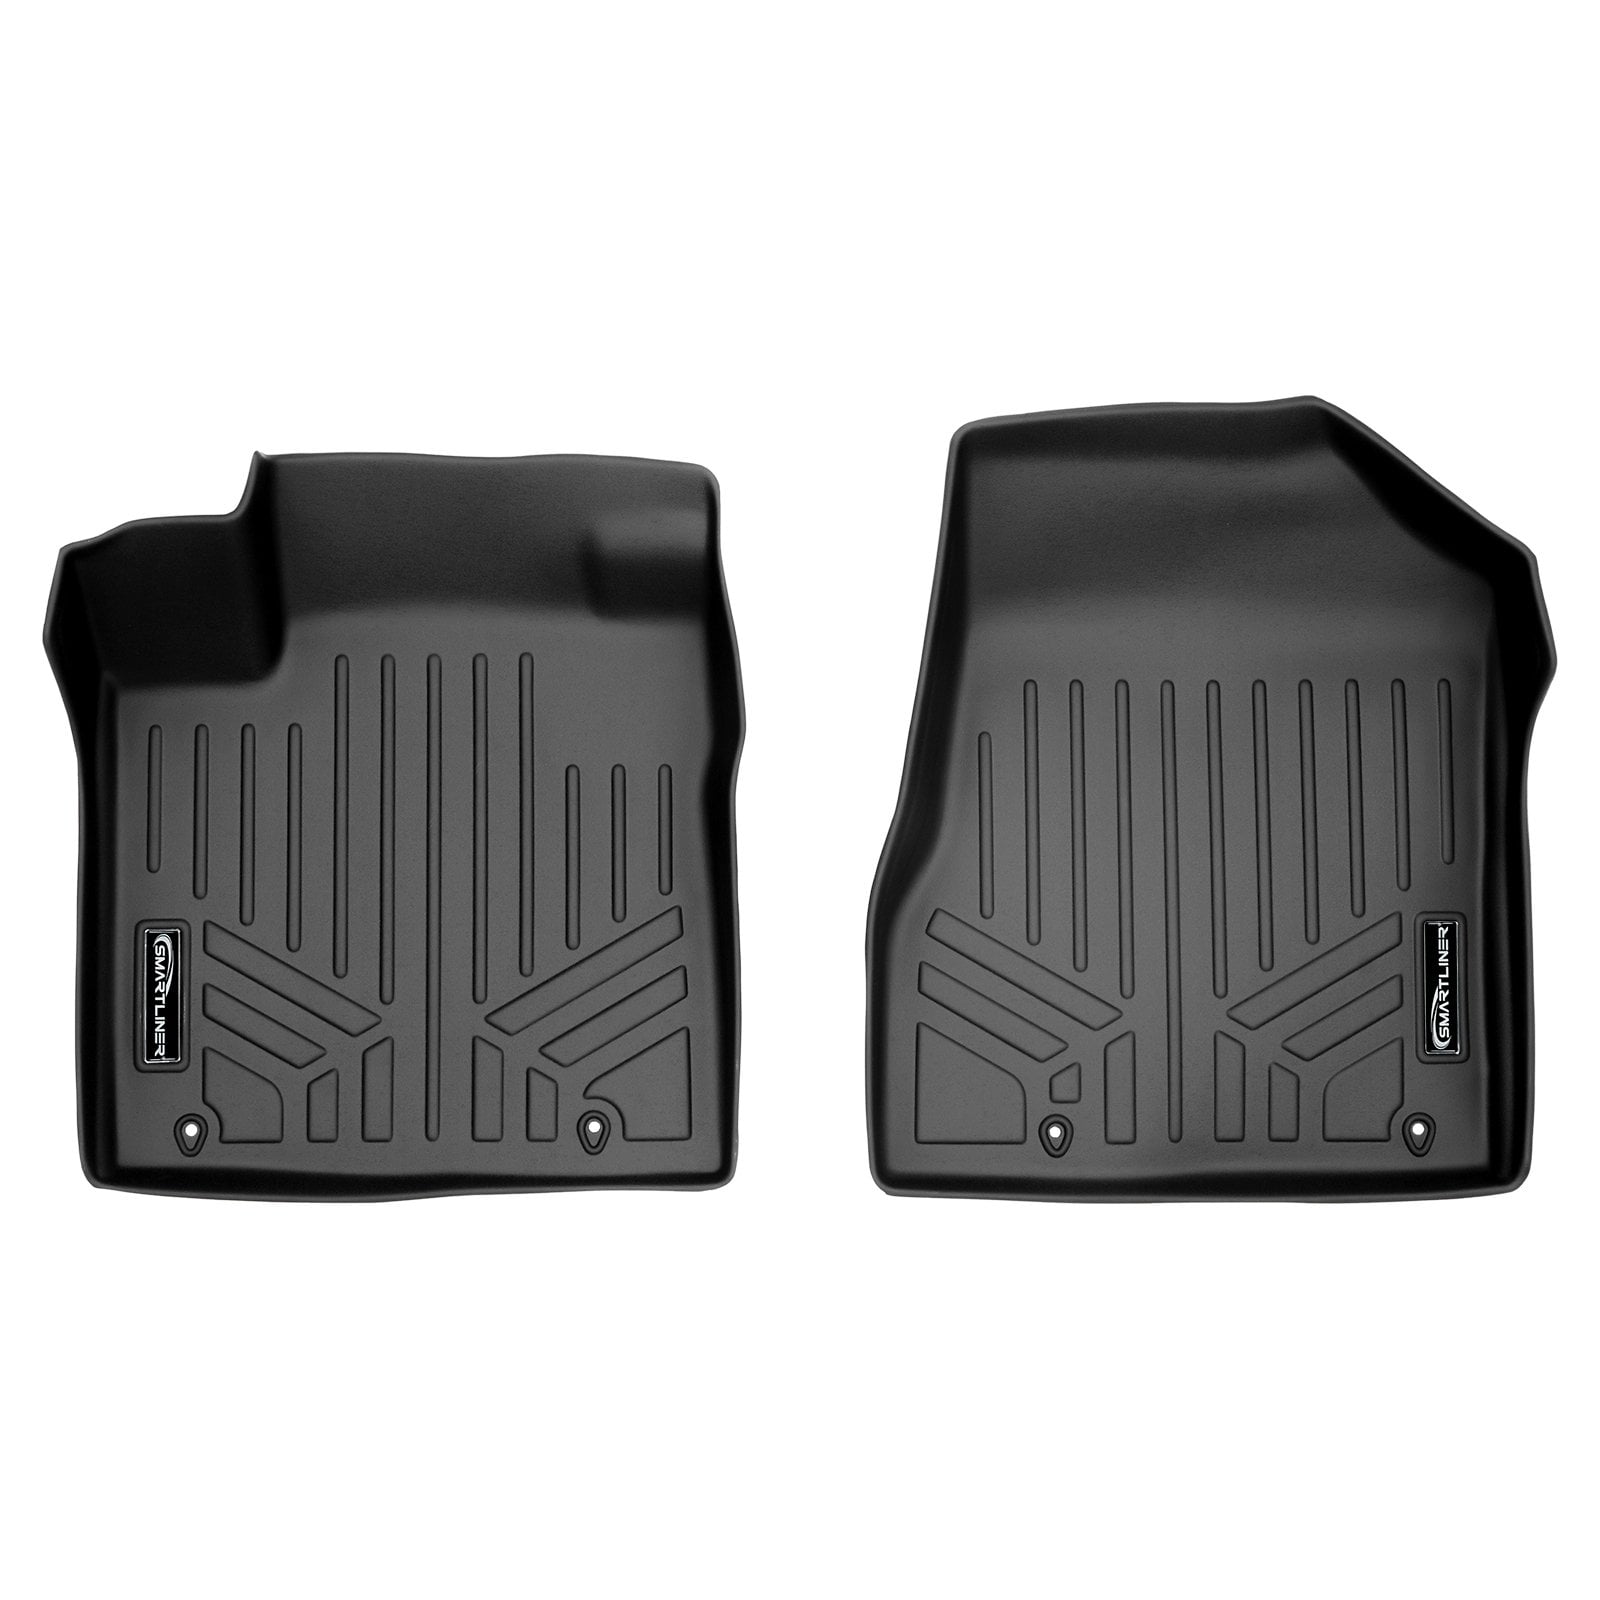 Largest Coverage The Ultimate Winter Mats TuxMat Custom Car Floor Mats for Nissan Murano 2015-2019 Models - Laser Measured All Weather Also Look Great in the Summer. The Best Nissan Murano Accessory. Waterproof Full Set - Black